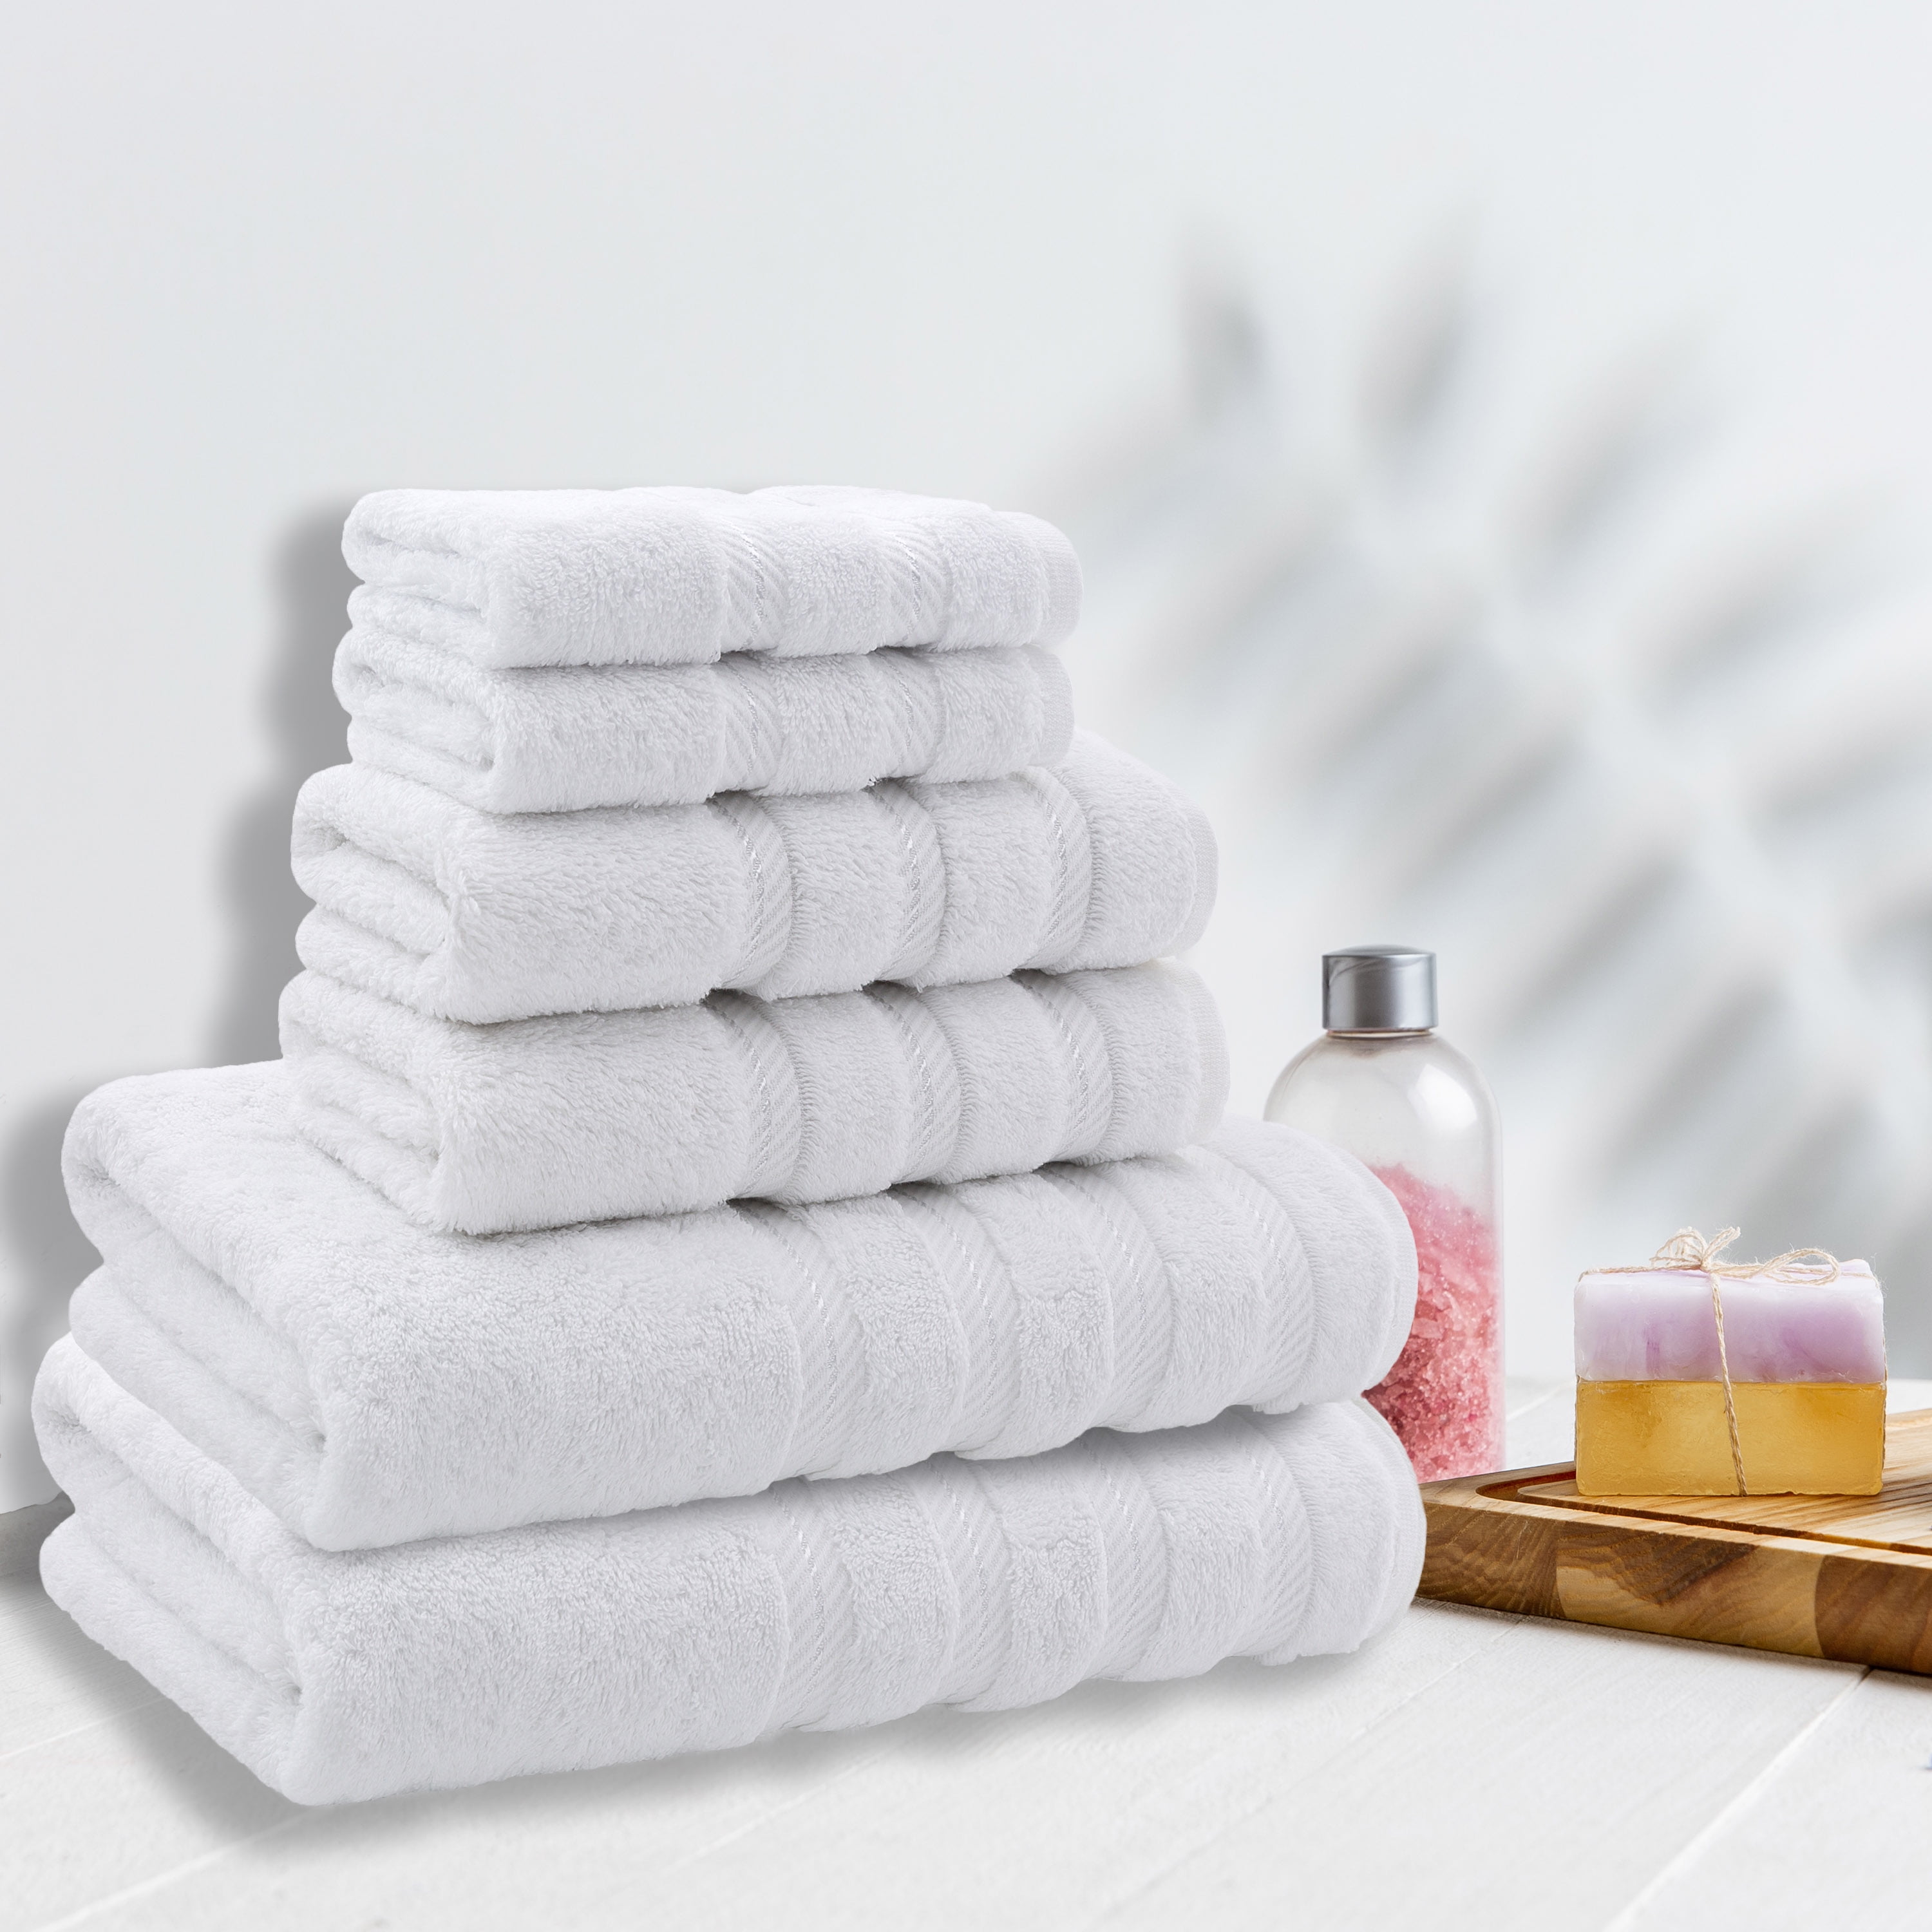 American Veteran Towel, Towels for Bathroom, 6 Piece Towel Sets for  Clearance Prime, 100% Turkish Cotton Bathroom Towels, 2 Bath Towels 2 Hand  Towels